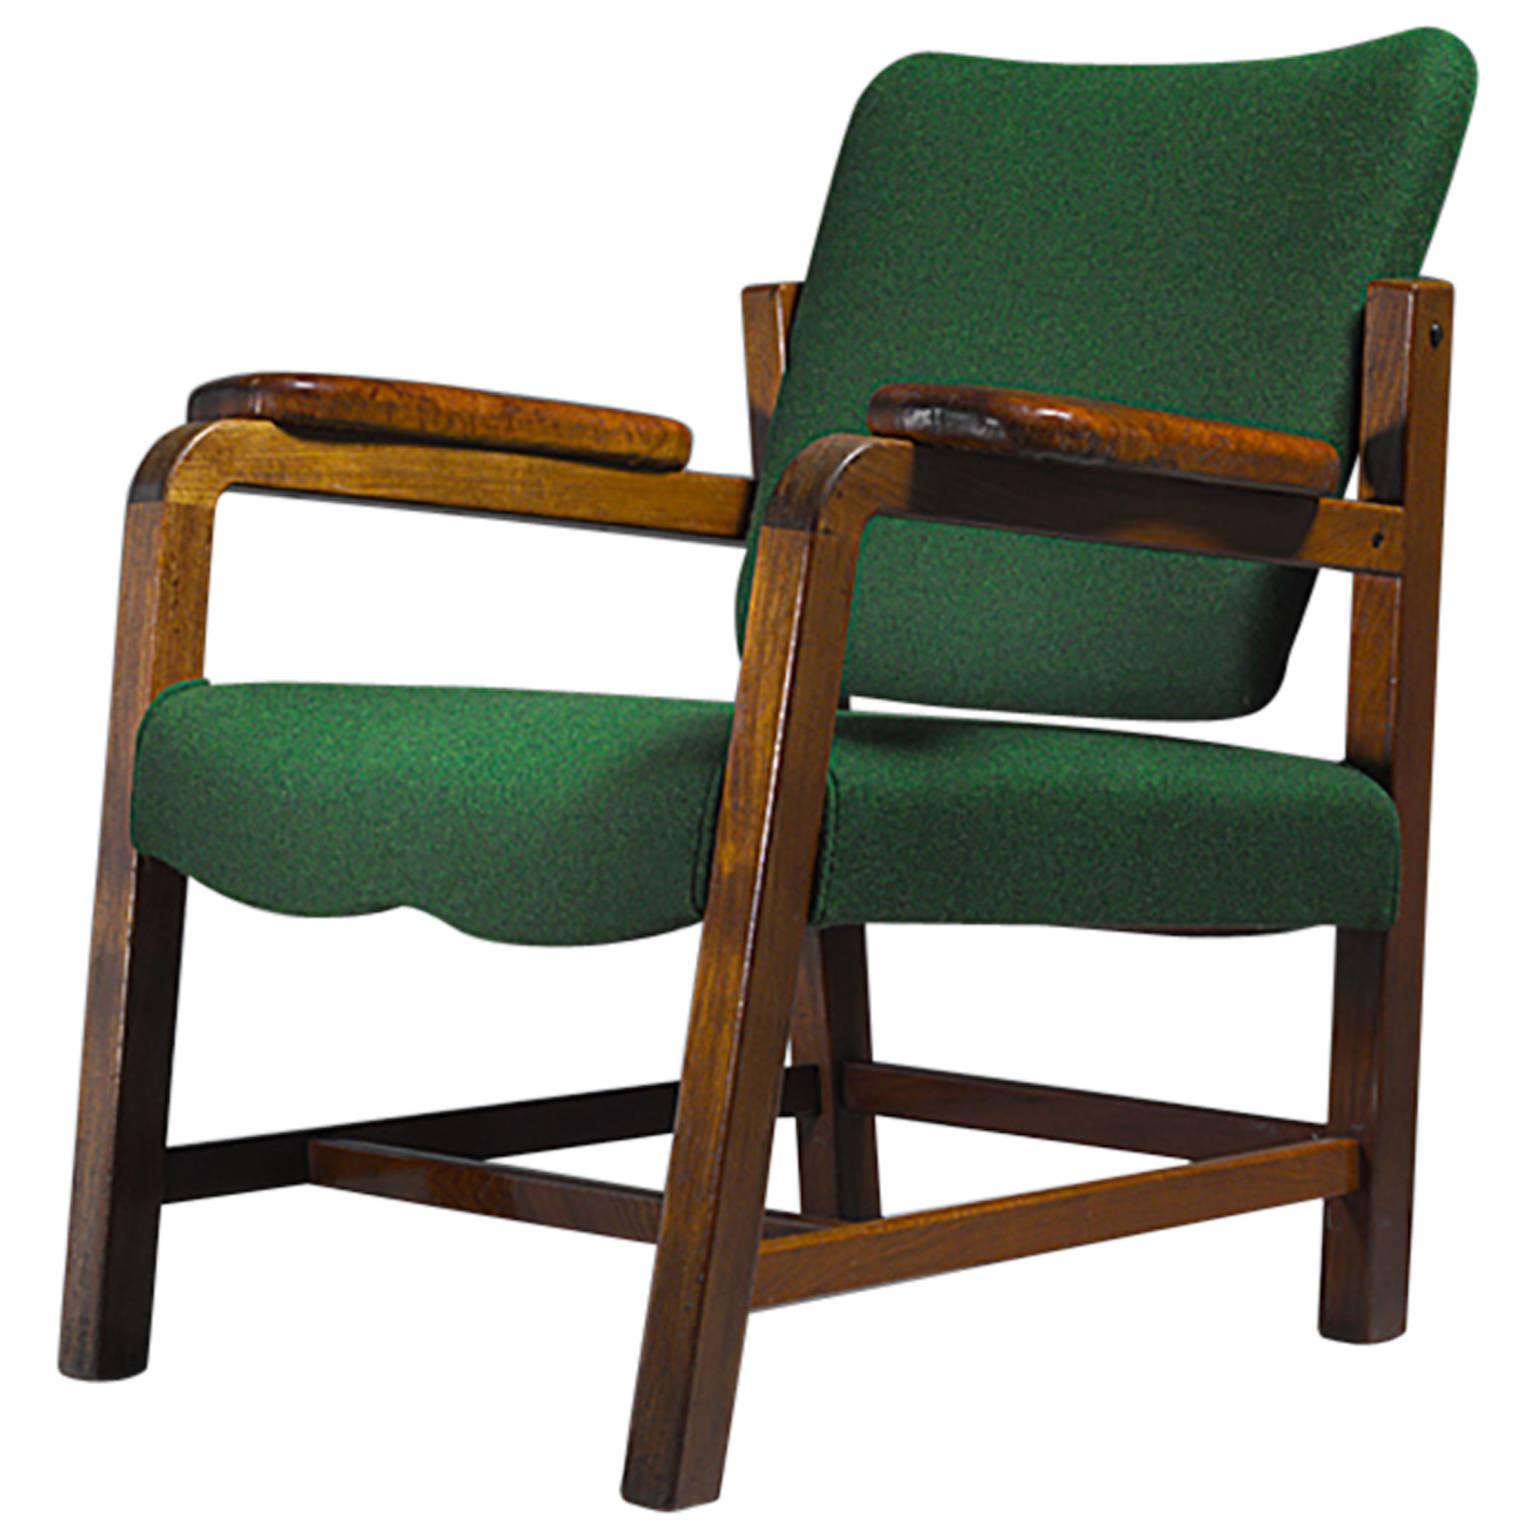 Flemming Teisen Mahogany Chair with Leather Armrests, Denmark, 1939 For Sale